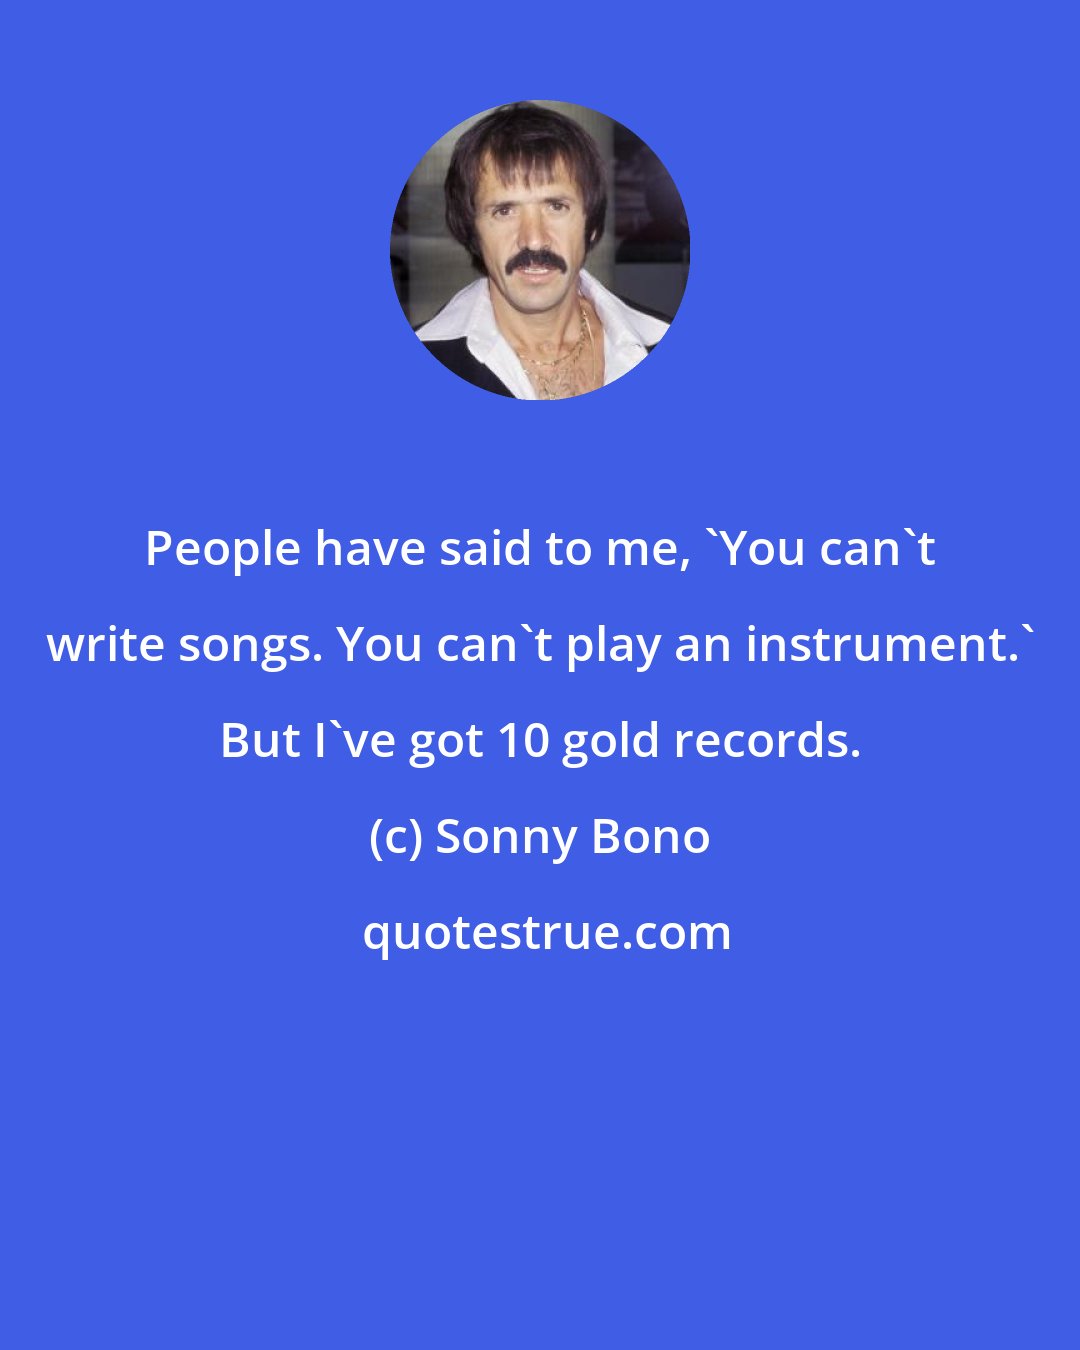 Sonny Bono: People have said to me, 'You can't write songs. You can't play an instrument.' But I've got 10 gold records.